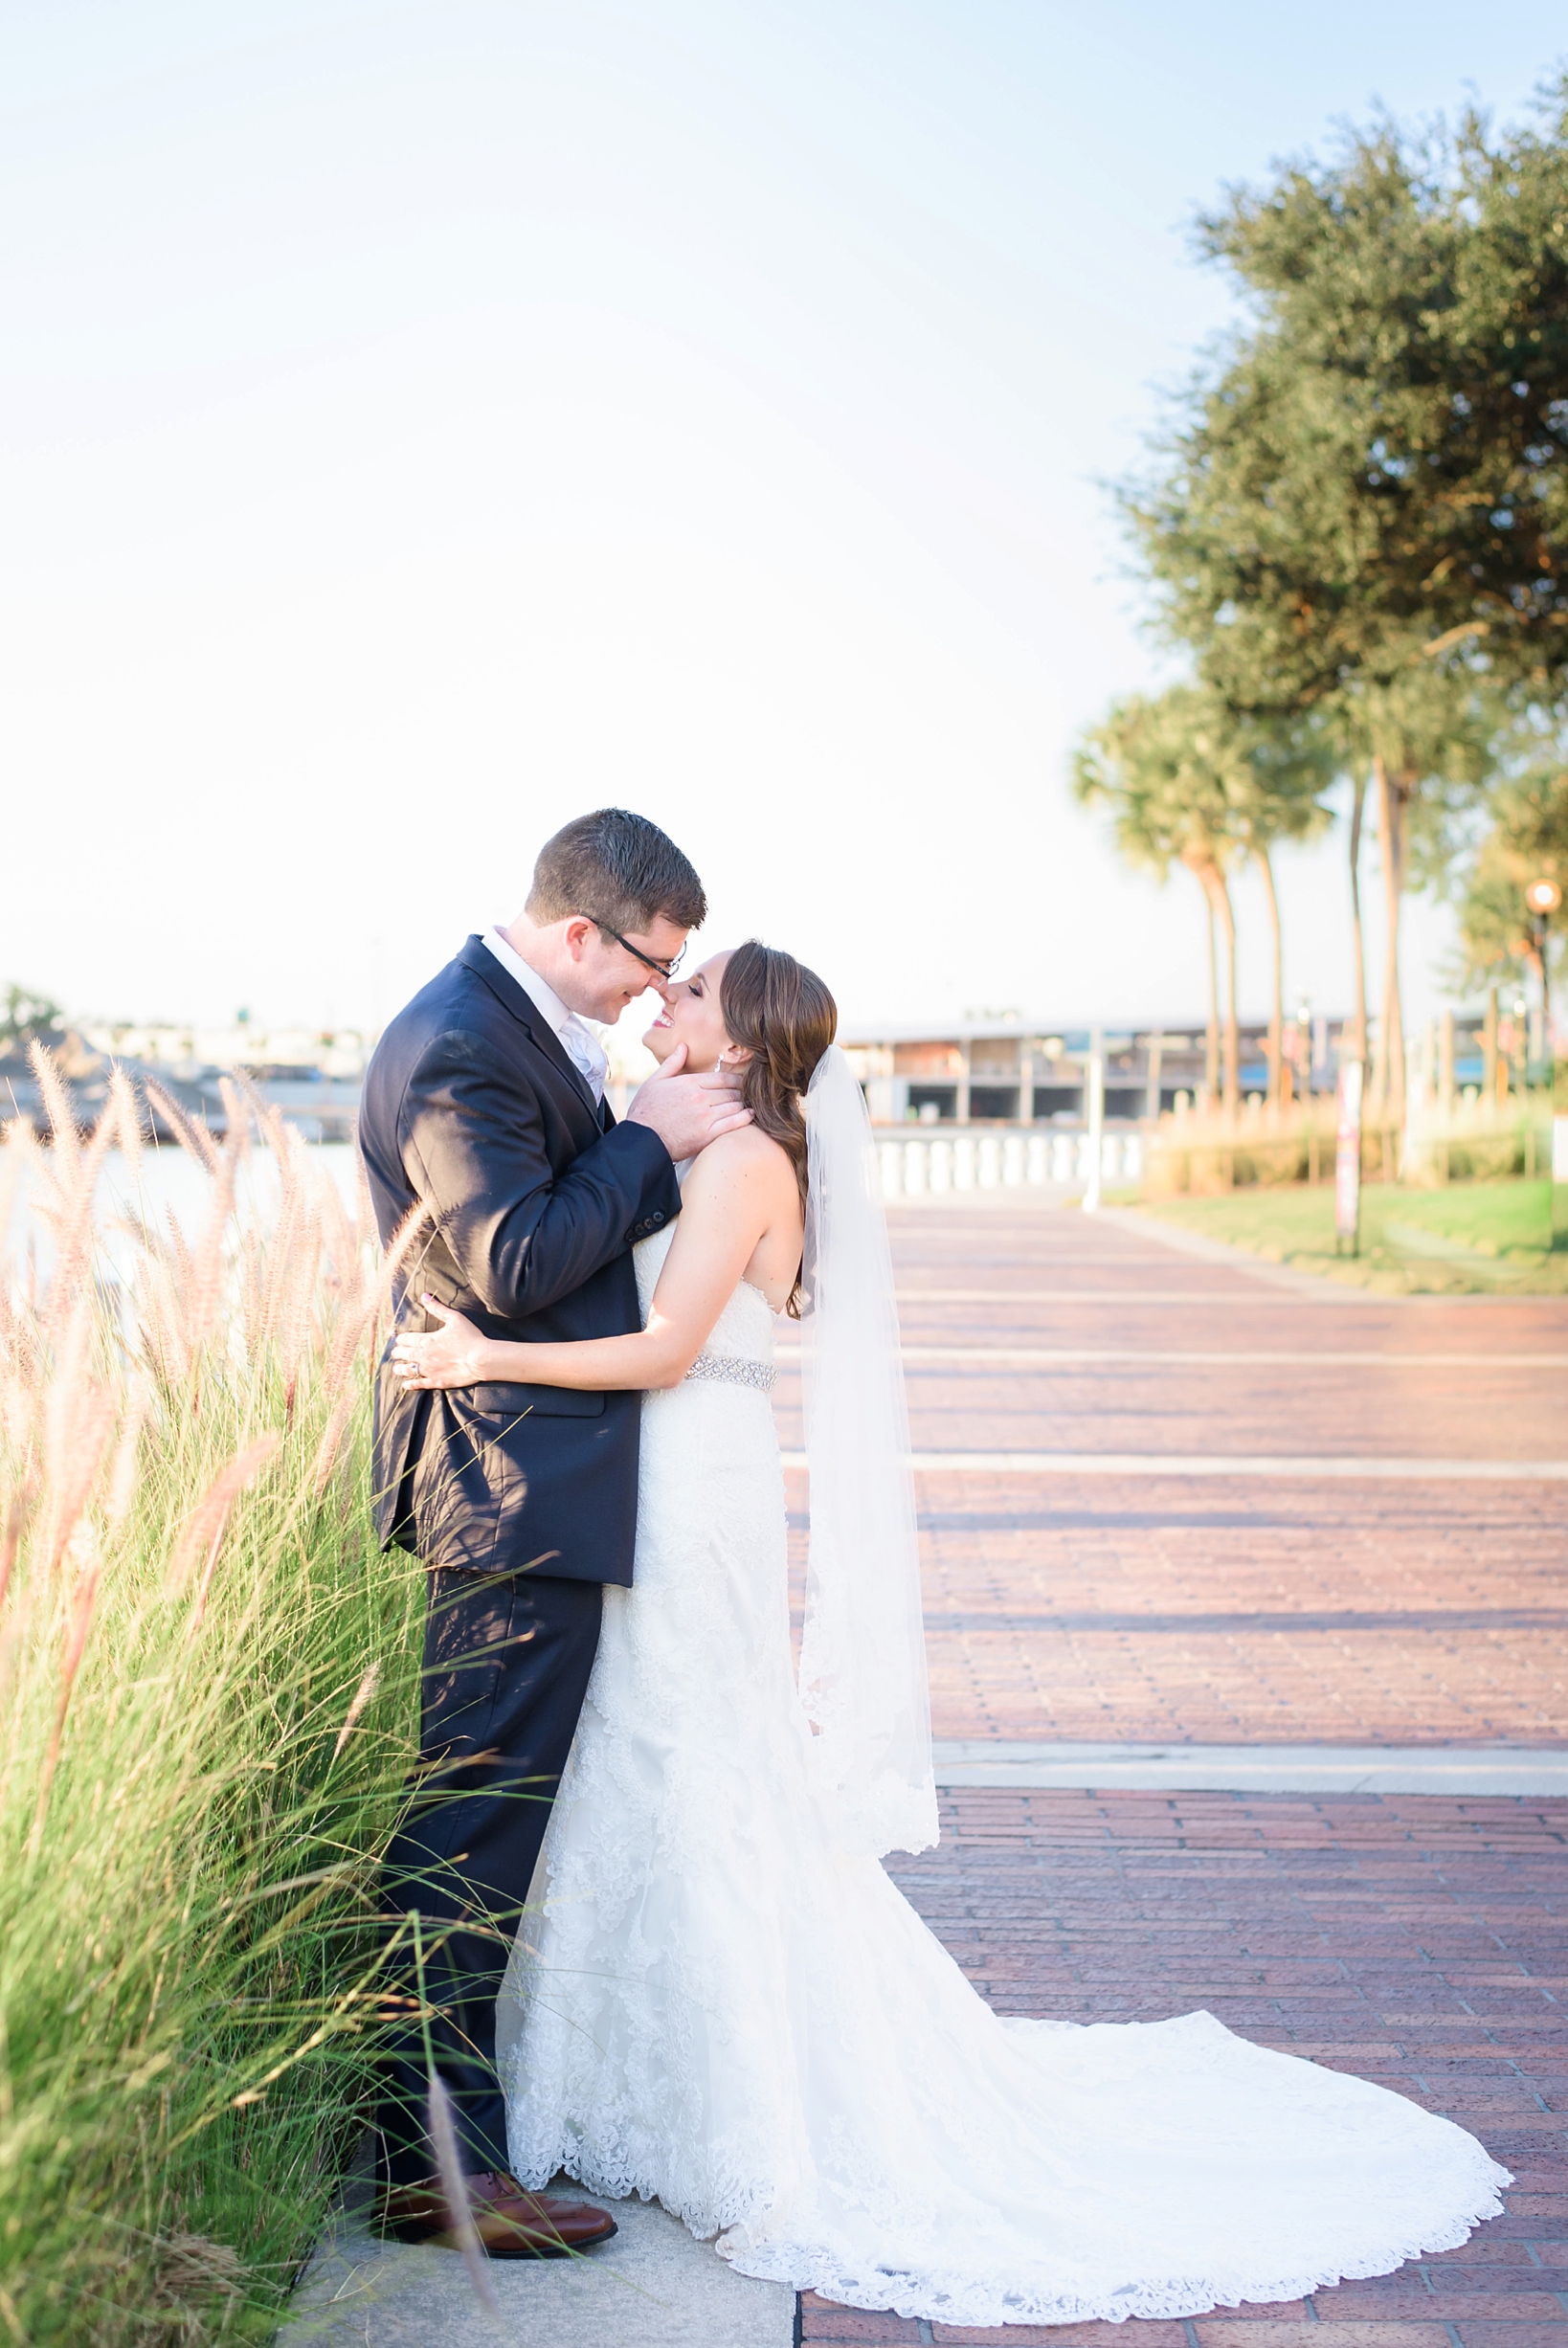 The Bride and Groom almost kissing outside teh Straz Center in Tampa, FL by Sarah & Ben Photography